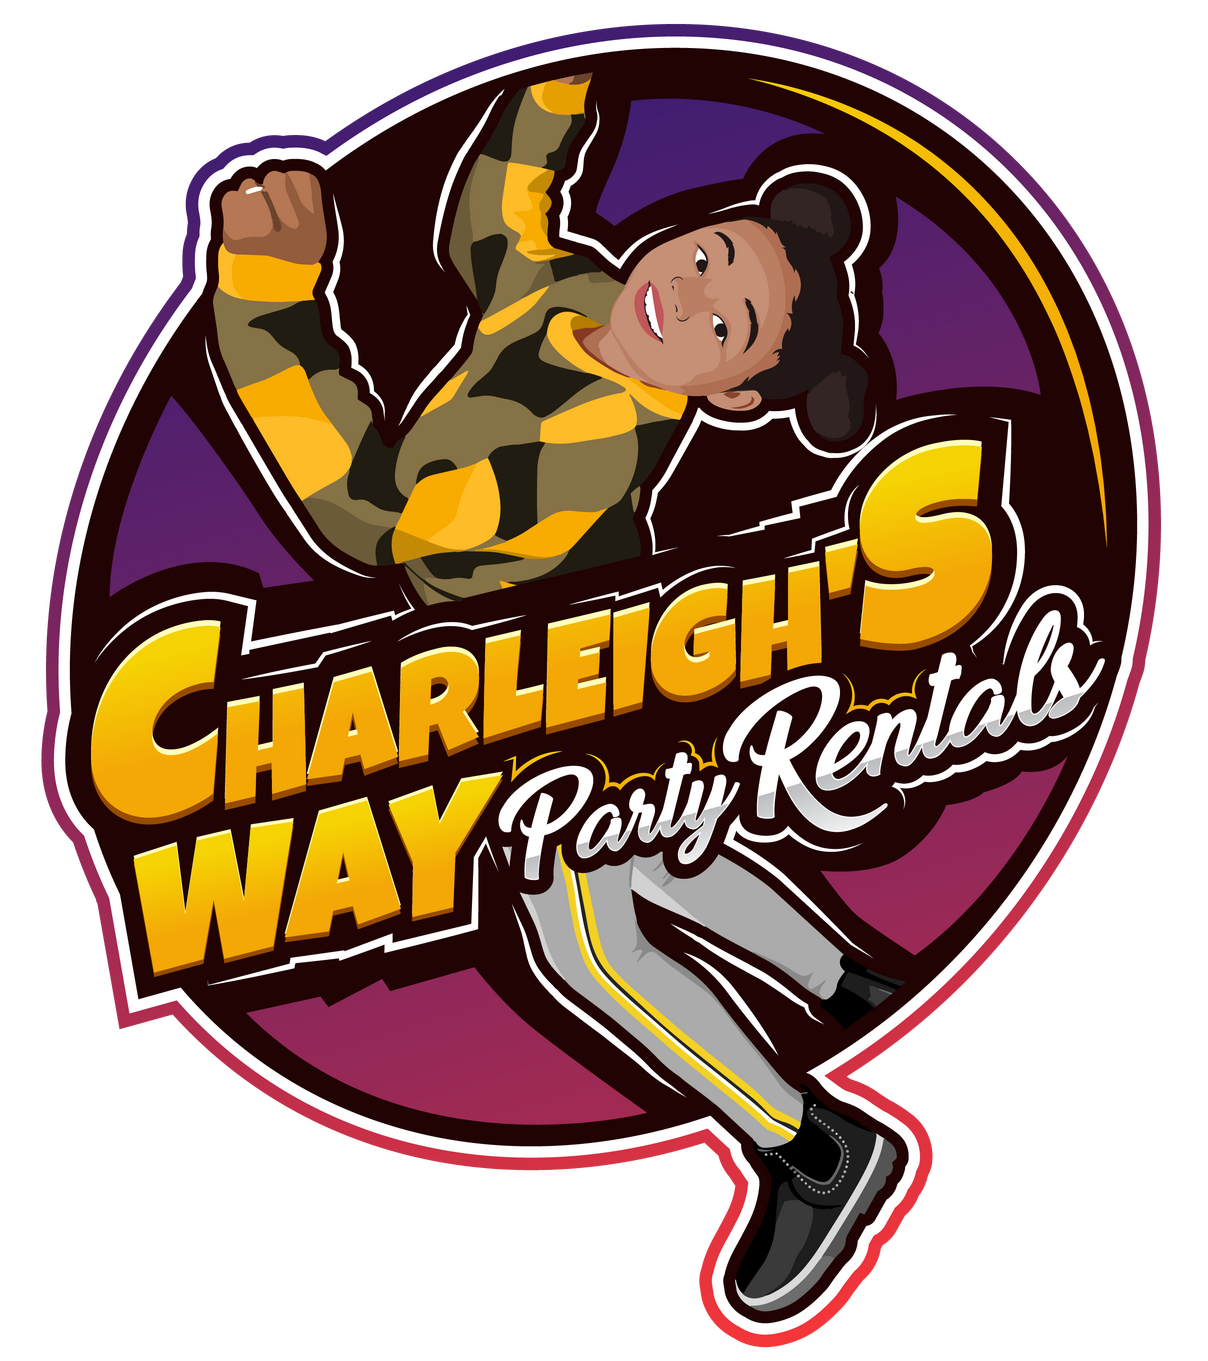 Charleigh's Way Party Rentals